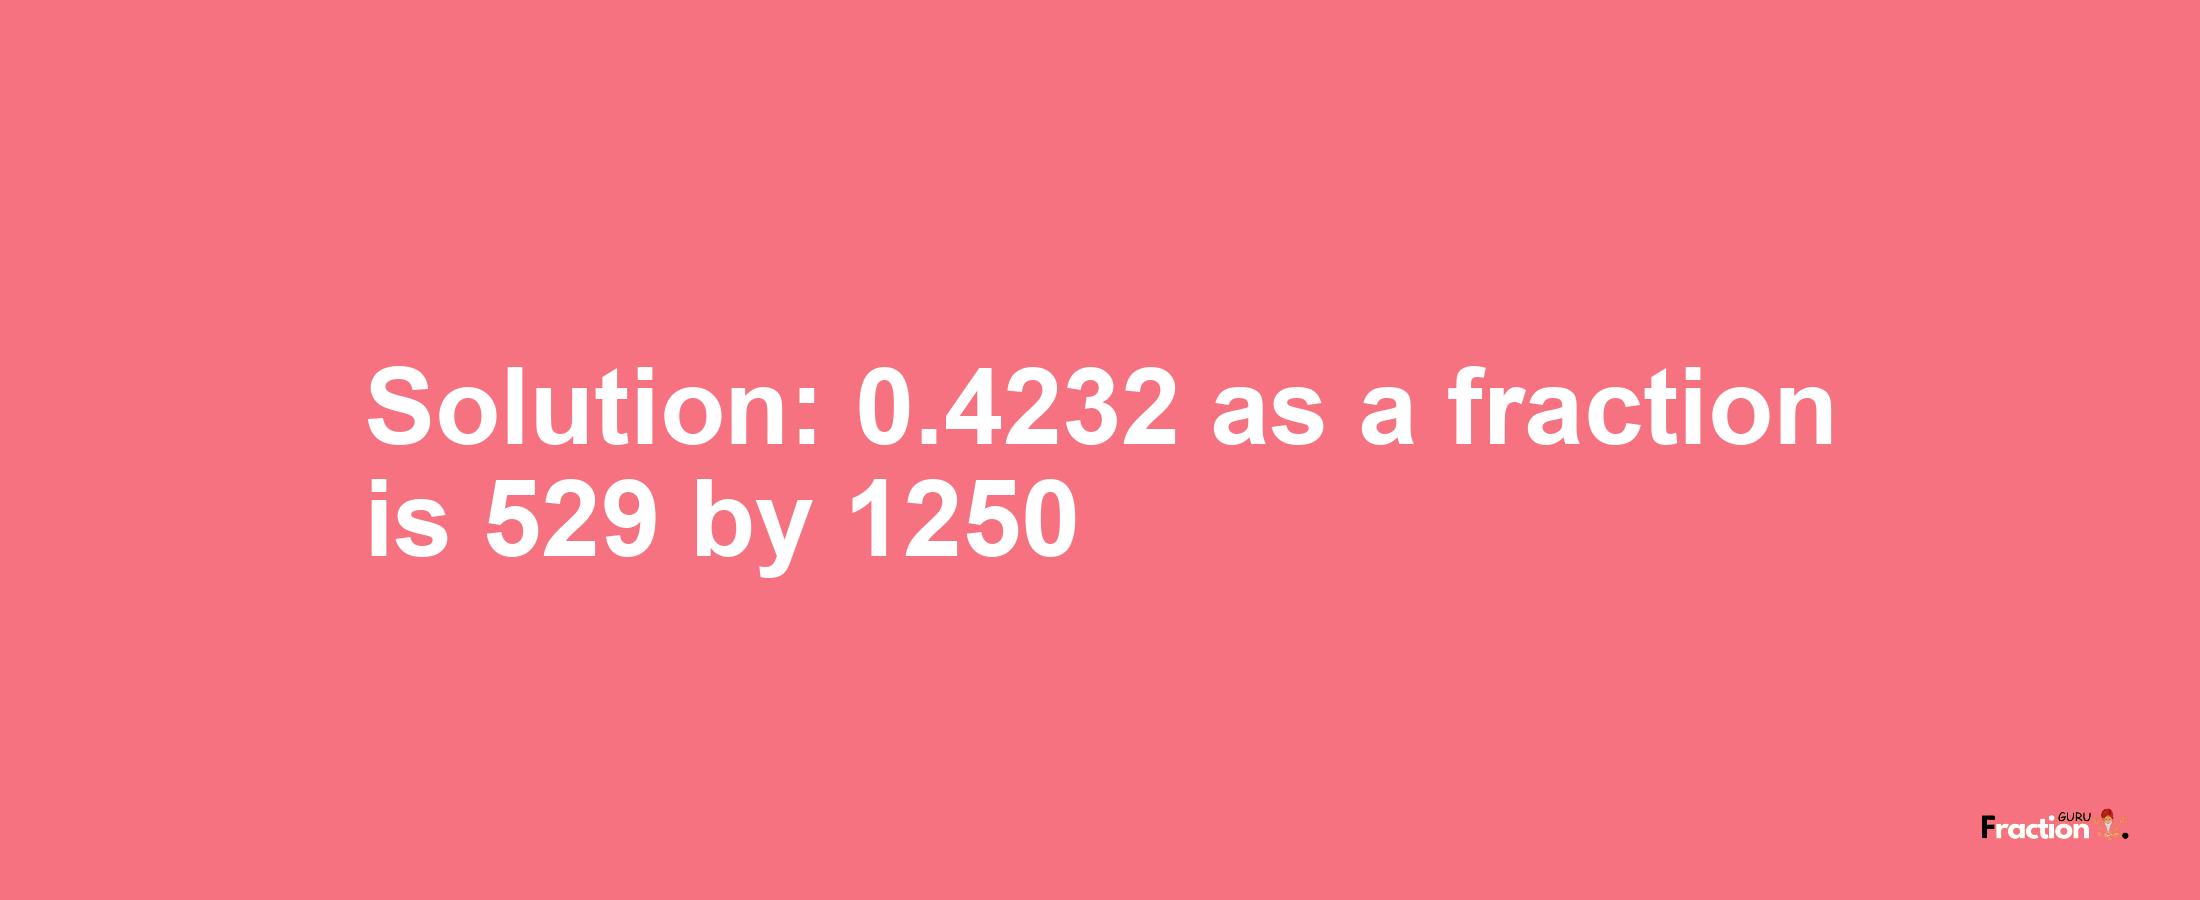 Solution:0.4232 as a fraction is 529/1250